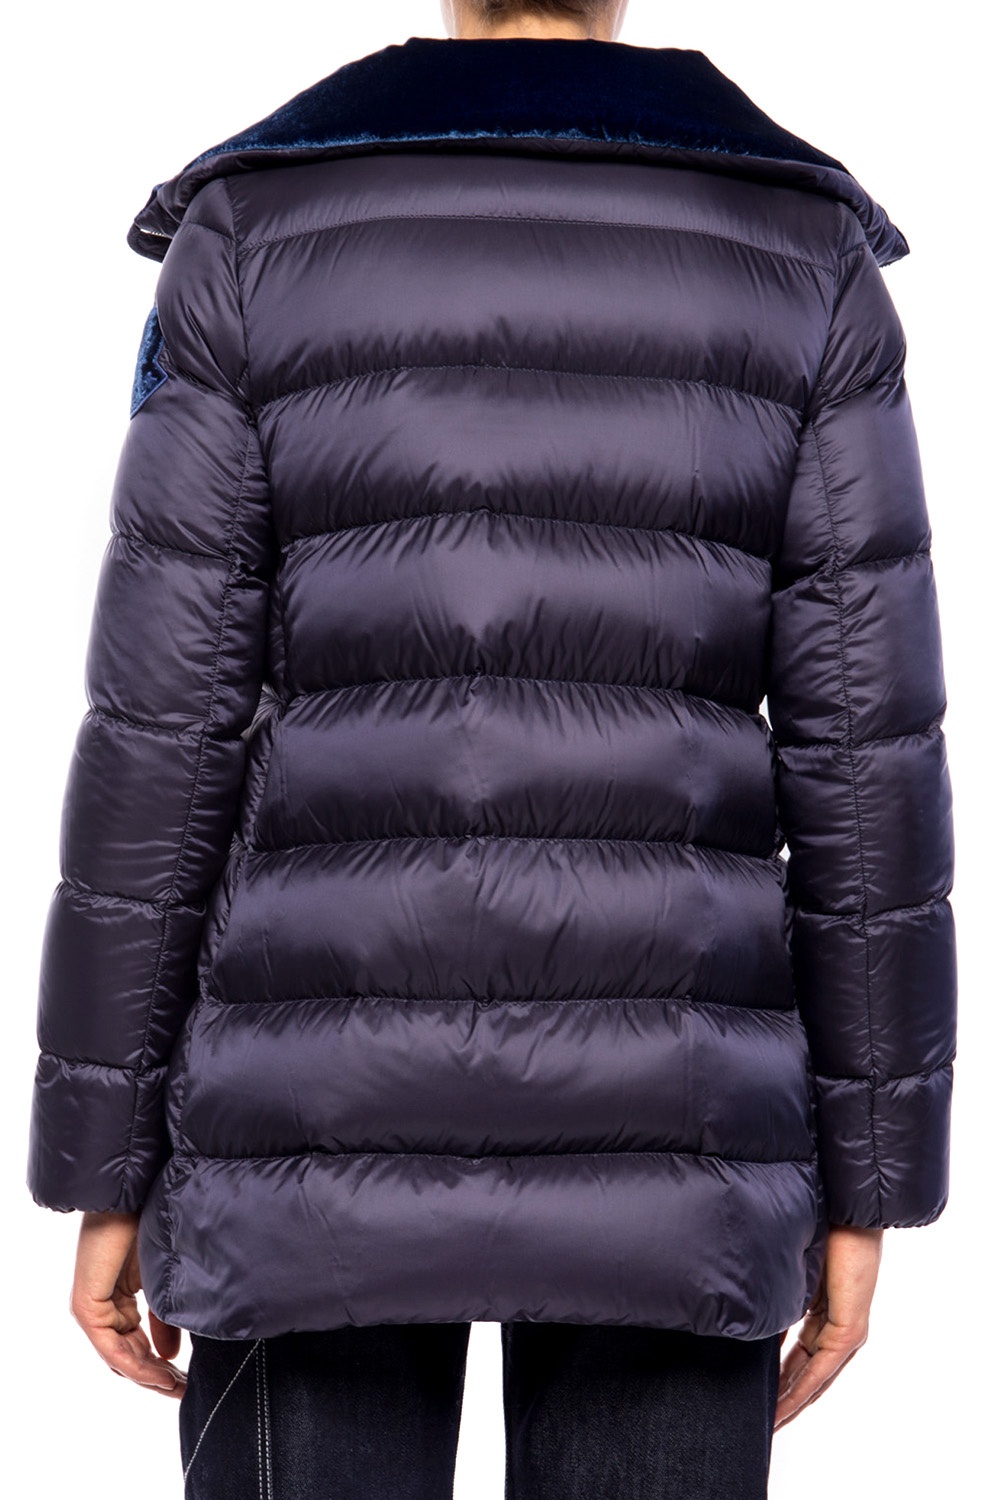 ‘Torcon’ quilted jacket Moncler - Vitkac Australia